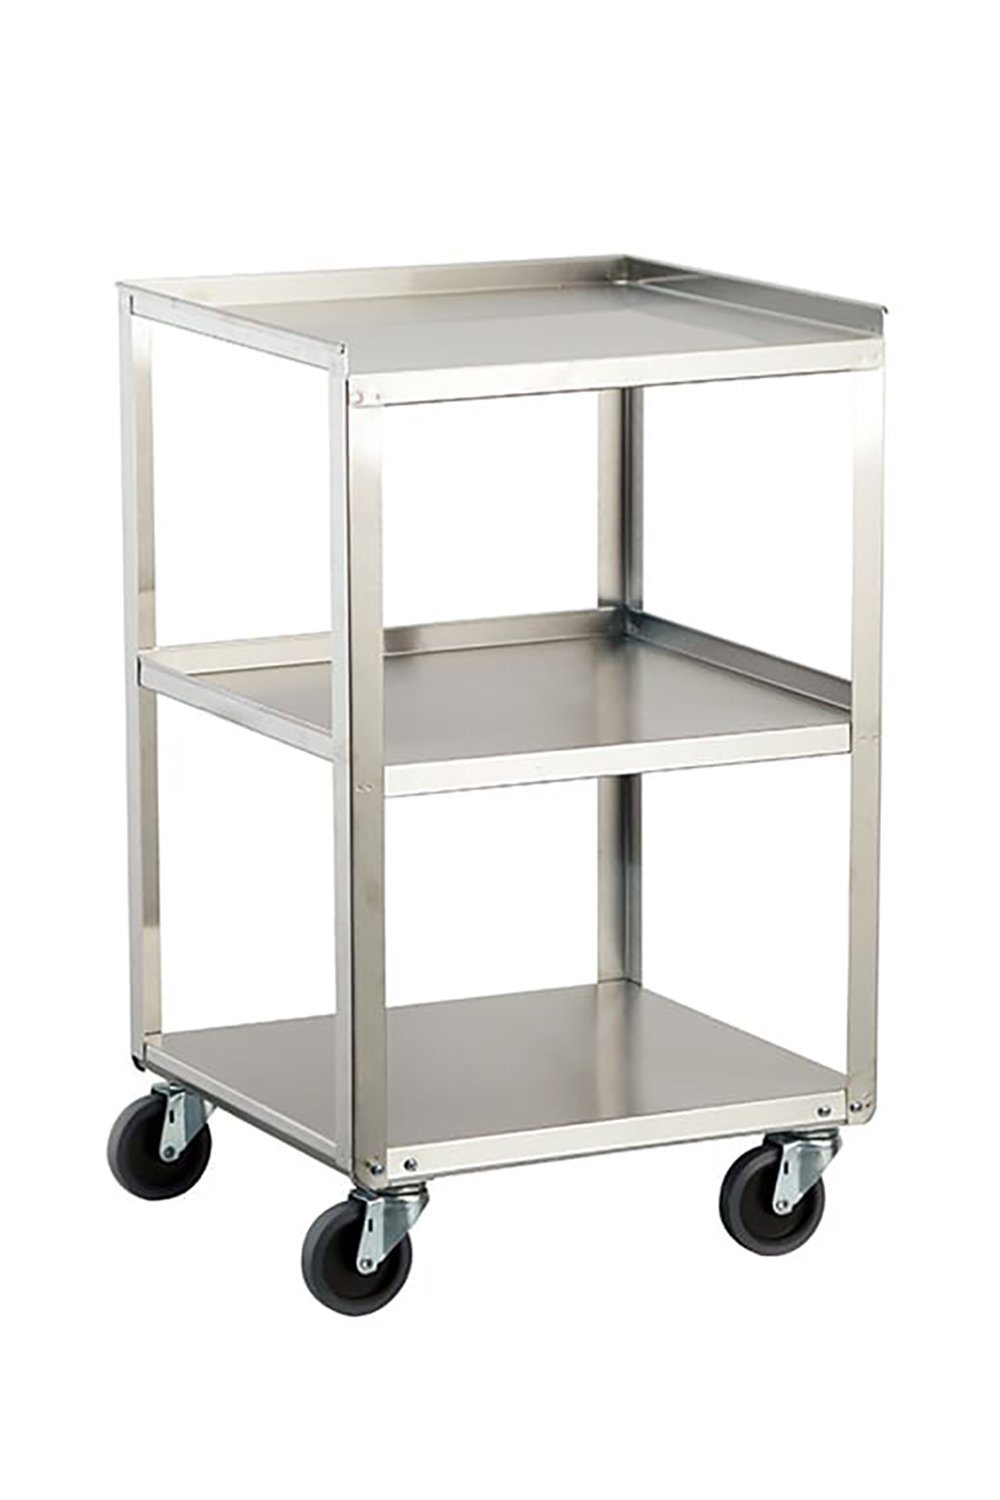 Stainless Steel Equipment/Utility Stand Stainless Solutions Lakeside 18-3/4"D x 16-3/4"W x 30 1/8"h No drawers, three shelves 300.0